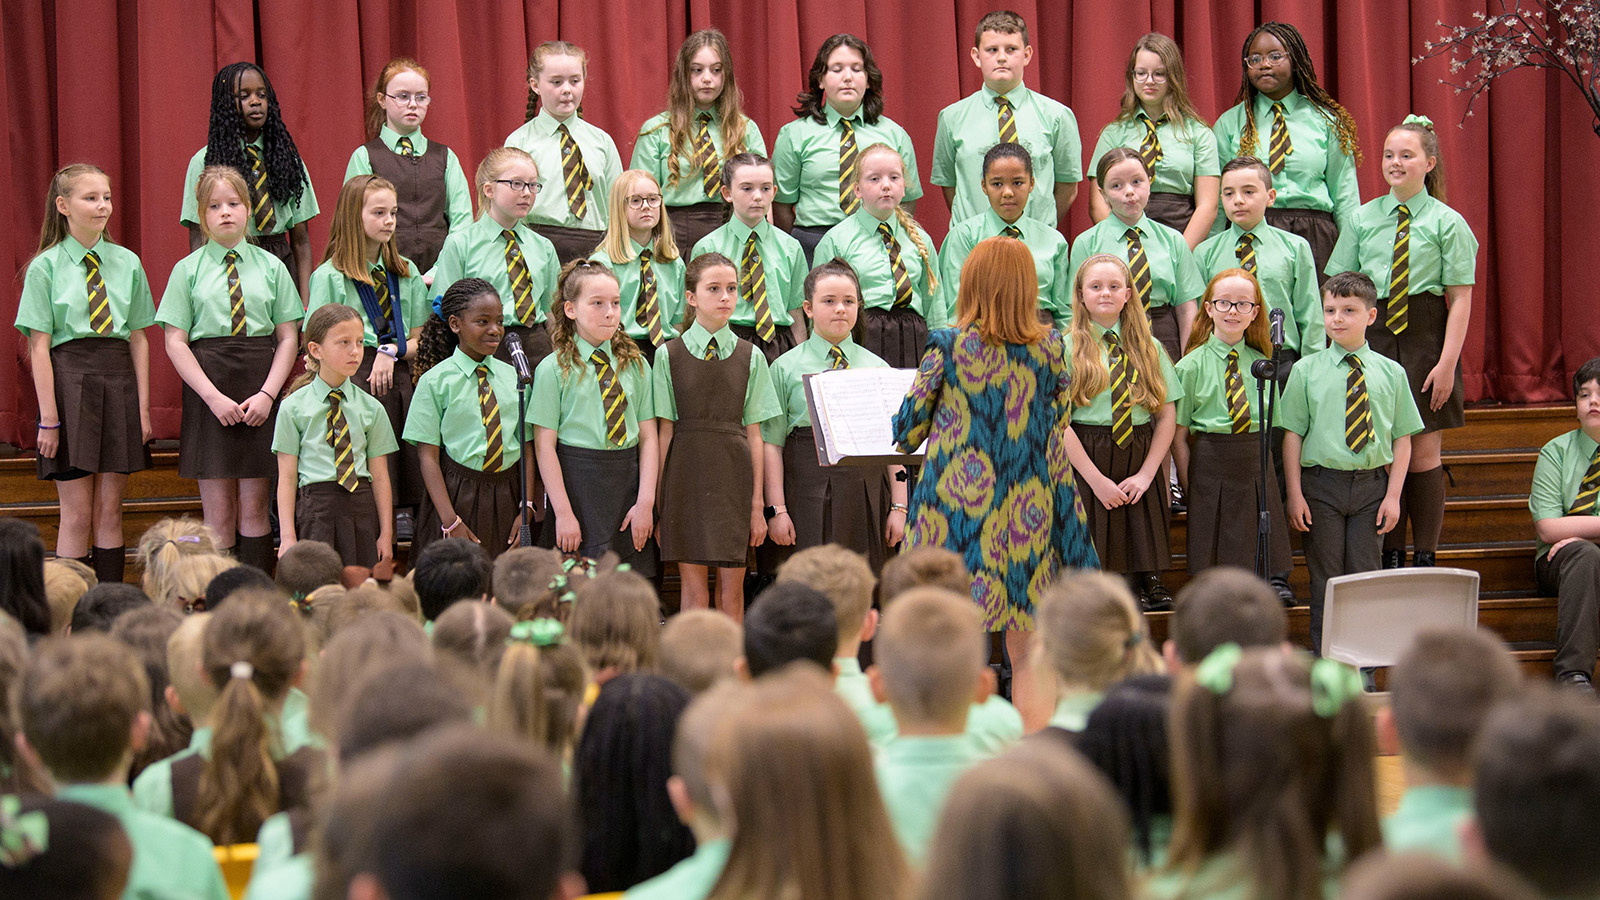 Boys and girls perform in a choir at their school before an audience of their friends and pupils